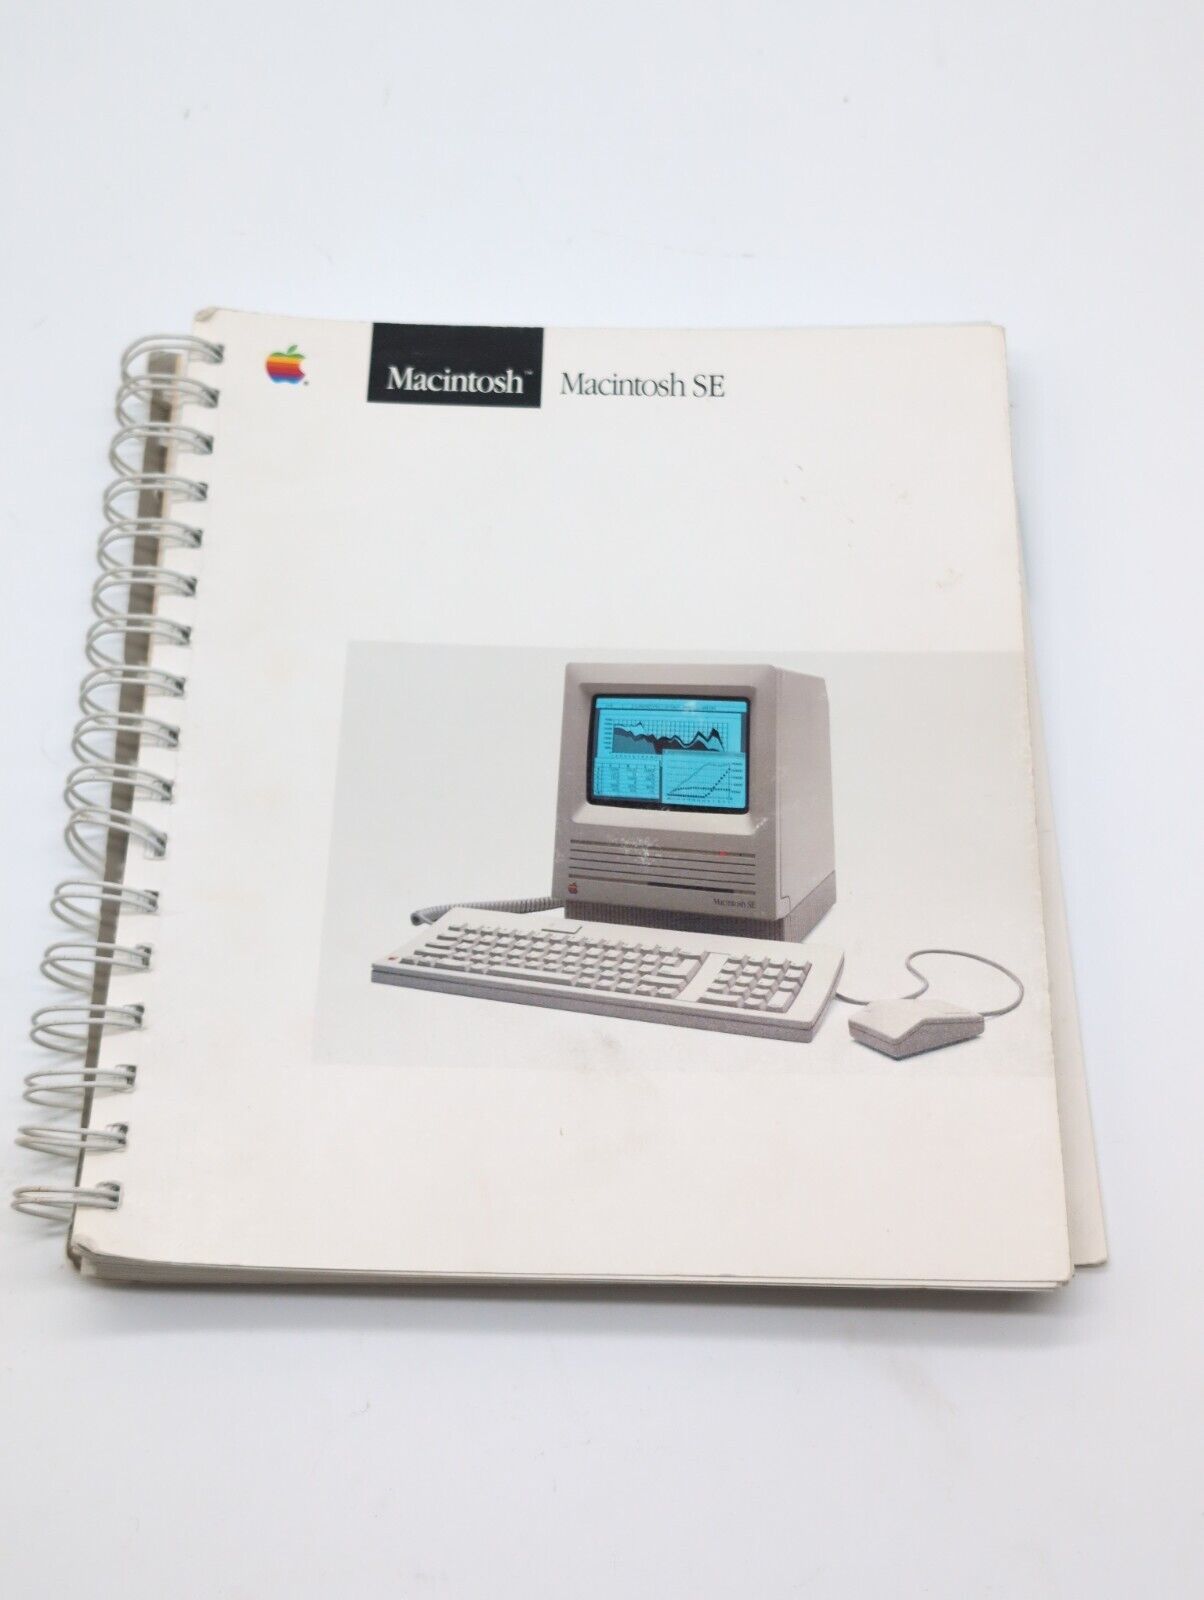 Macintosh SE Owners Guide Manuals for Apple Computer - 030-1337-A - Used